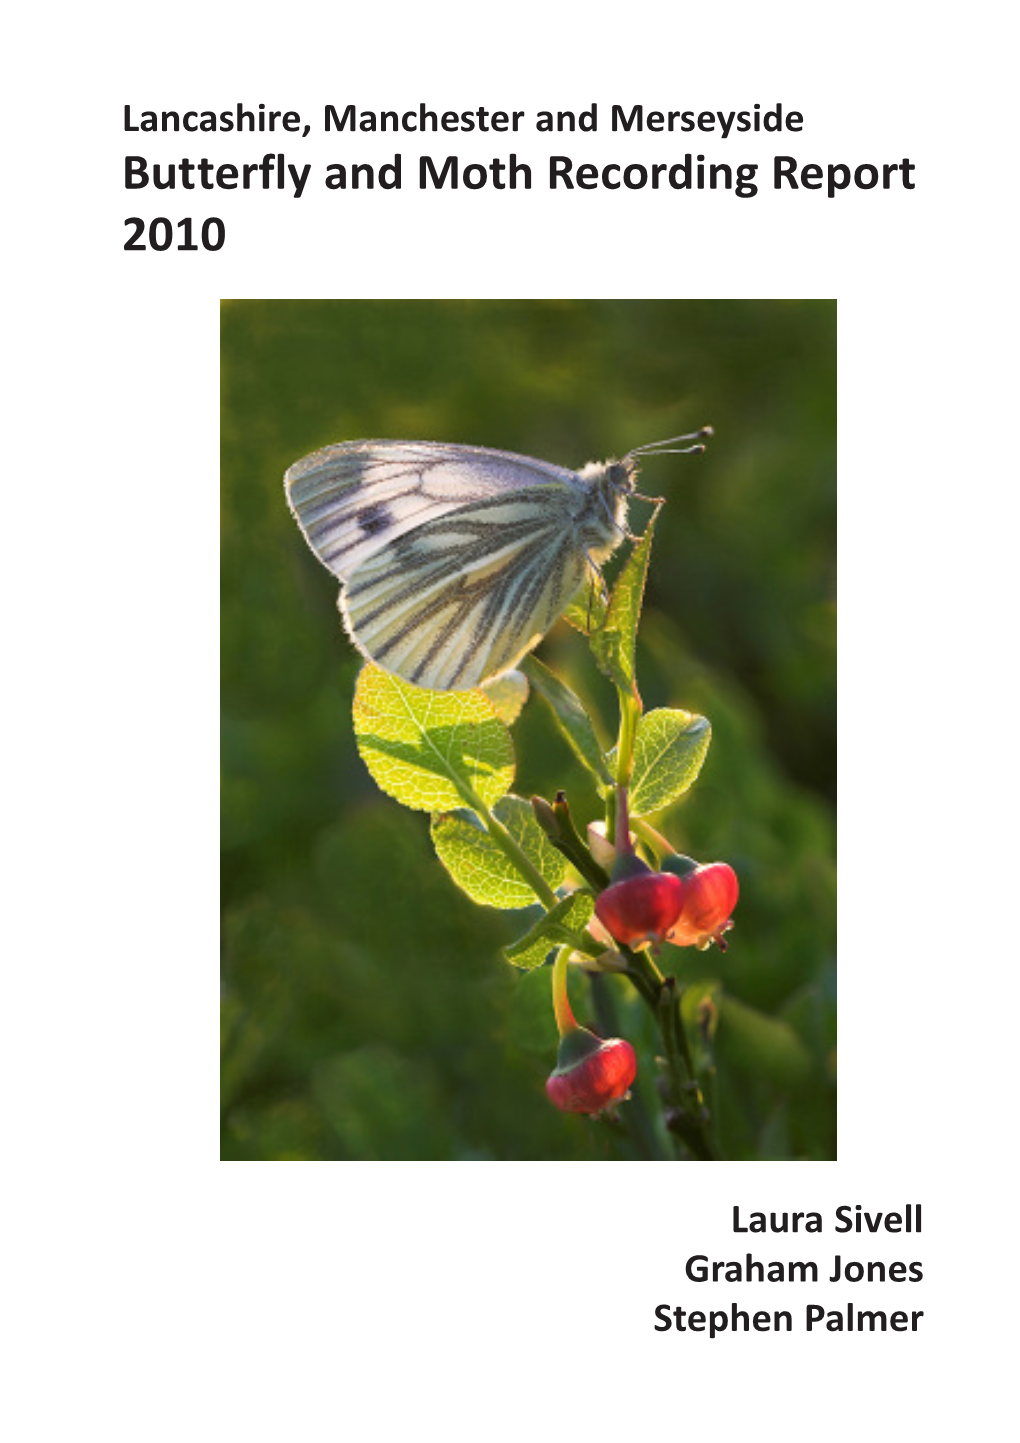 Butterfly and Moth Recording Report 2010